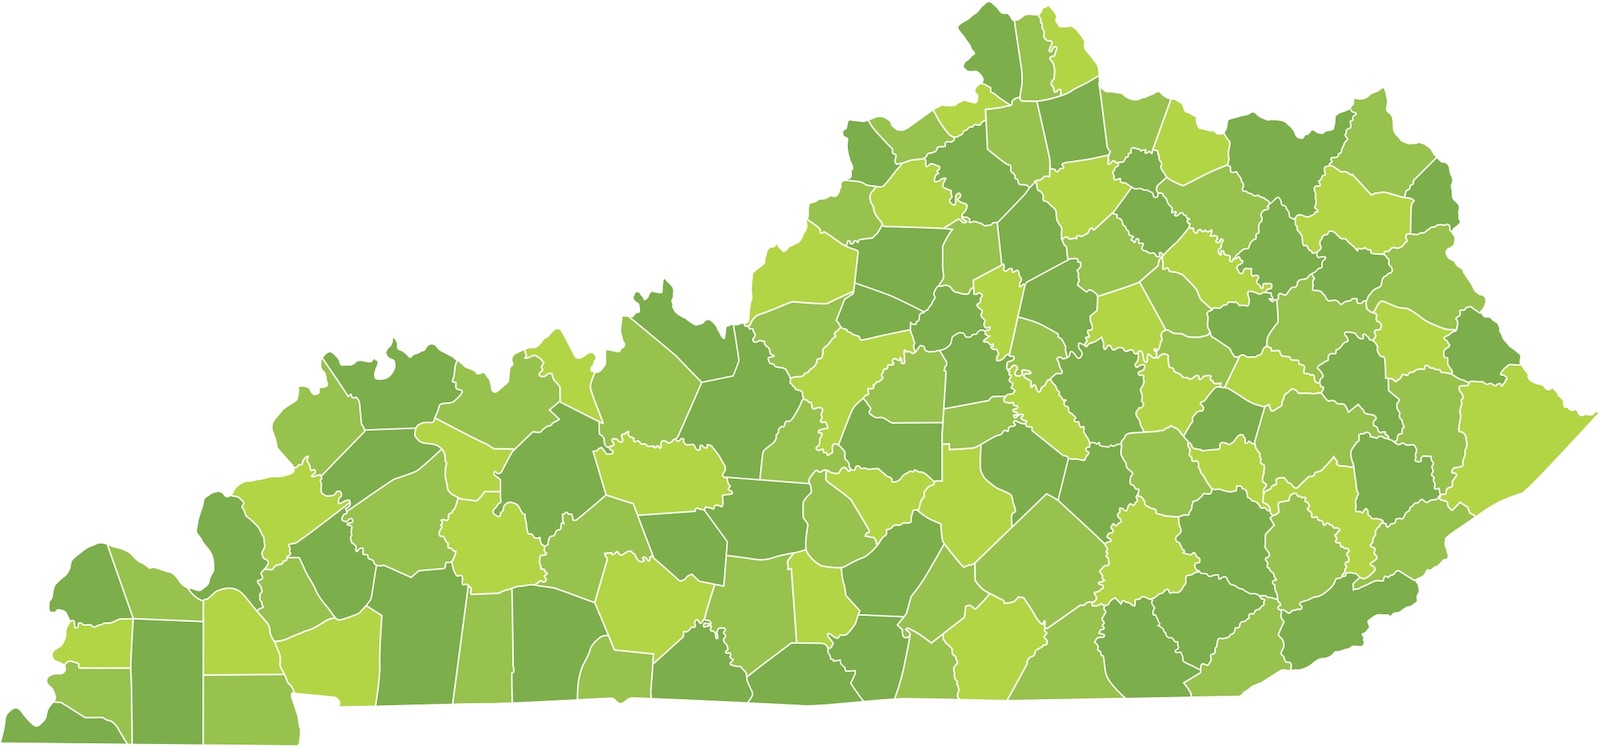 Map of Kentucky by counties with different shades of green for each county